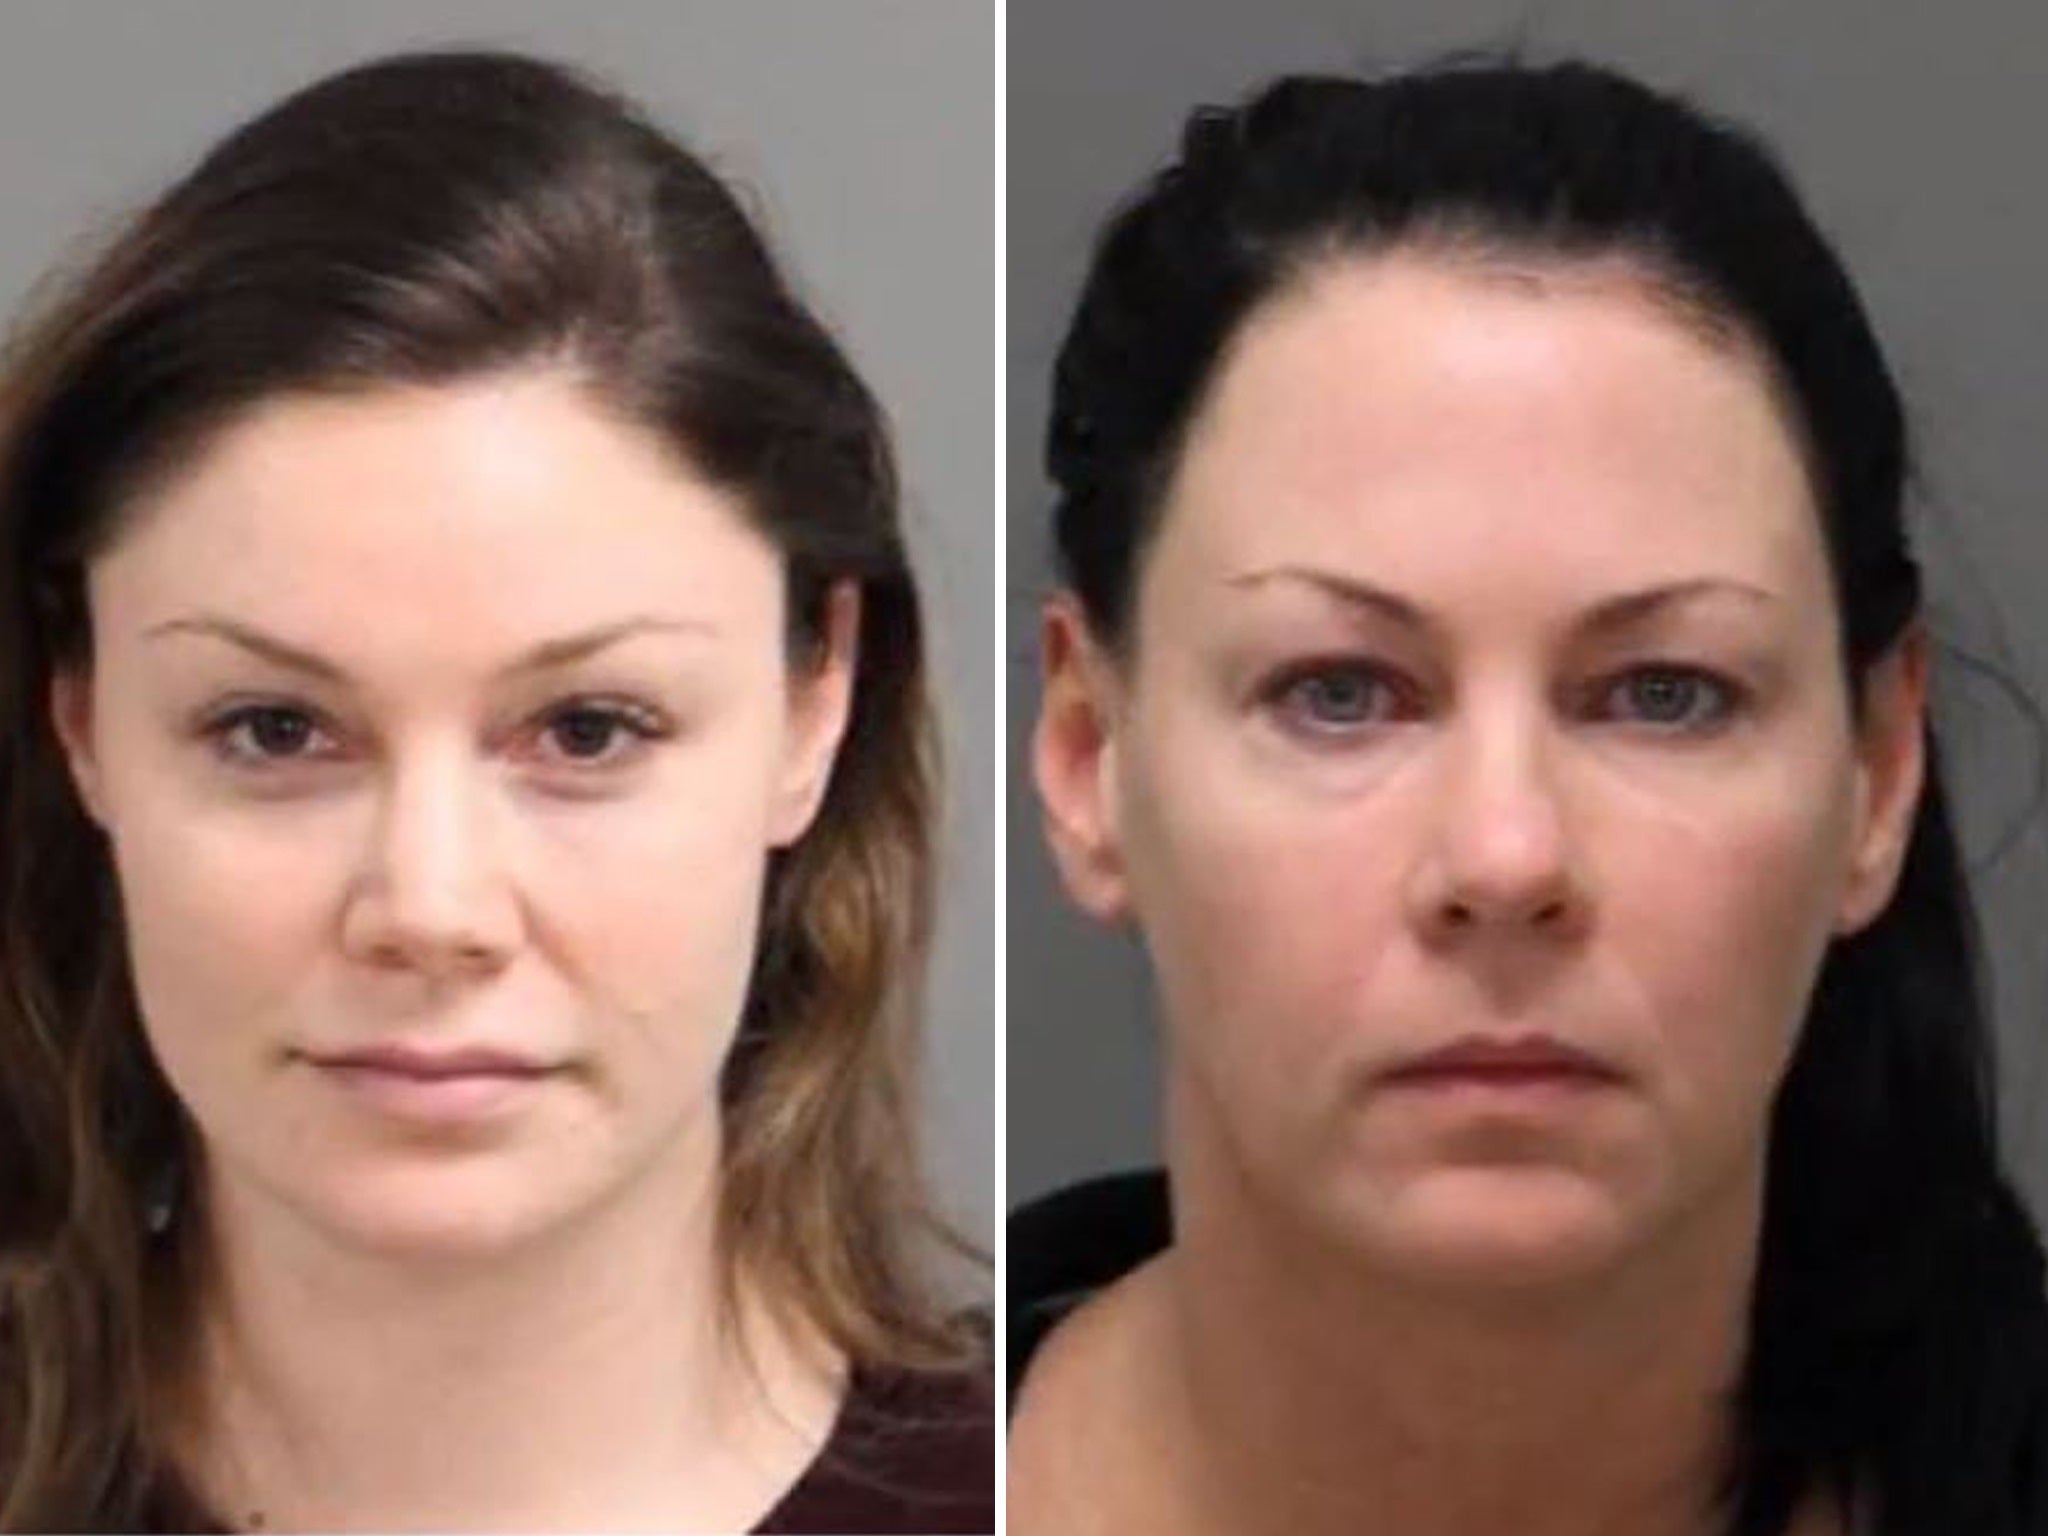 Jessica Fowler and Amber Harrell were arrested following the incident